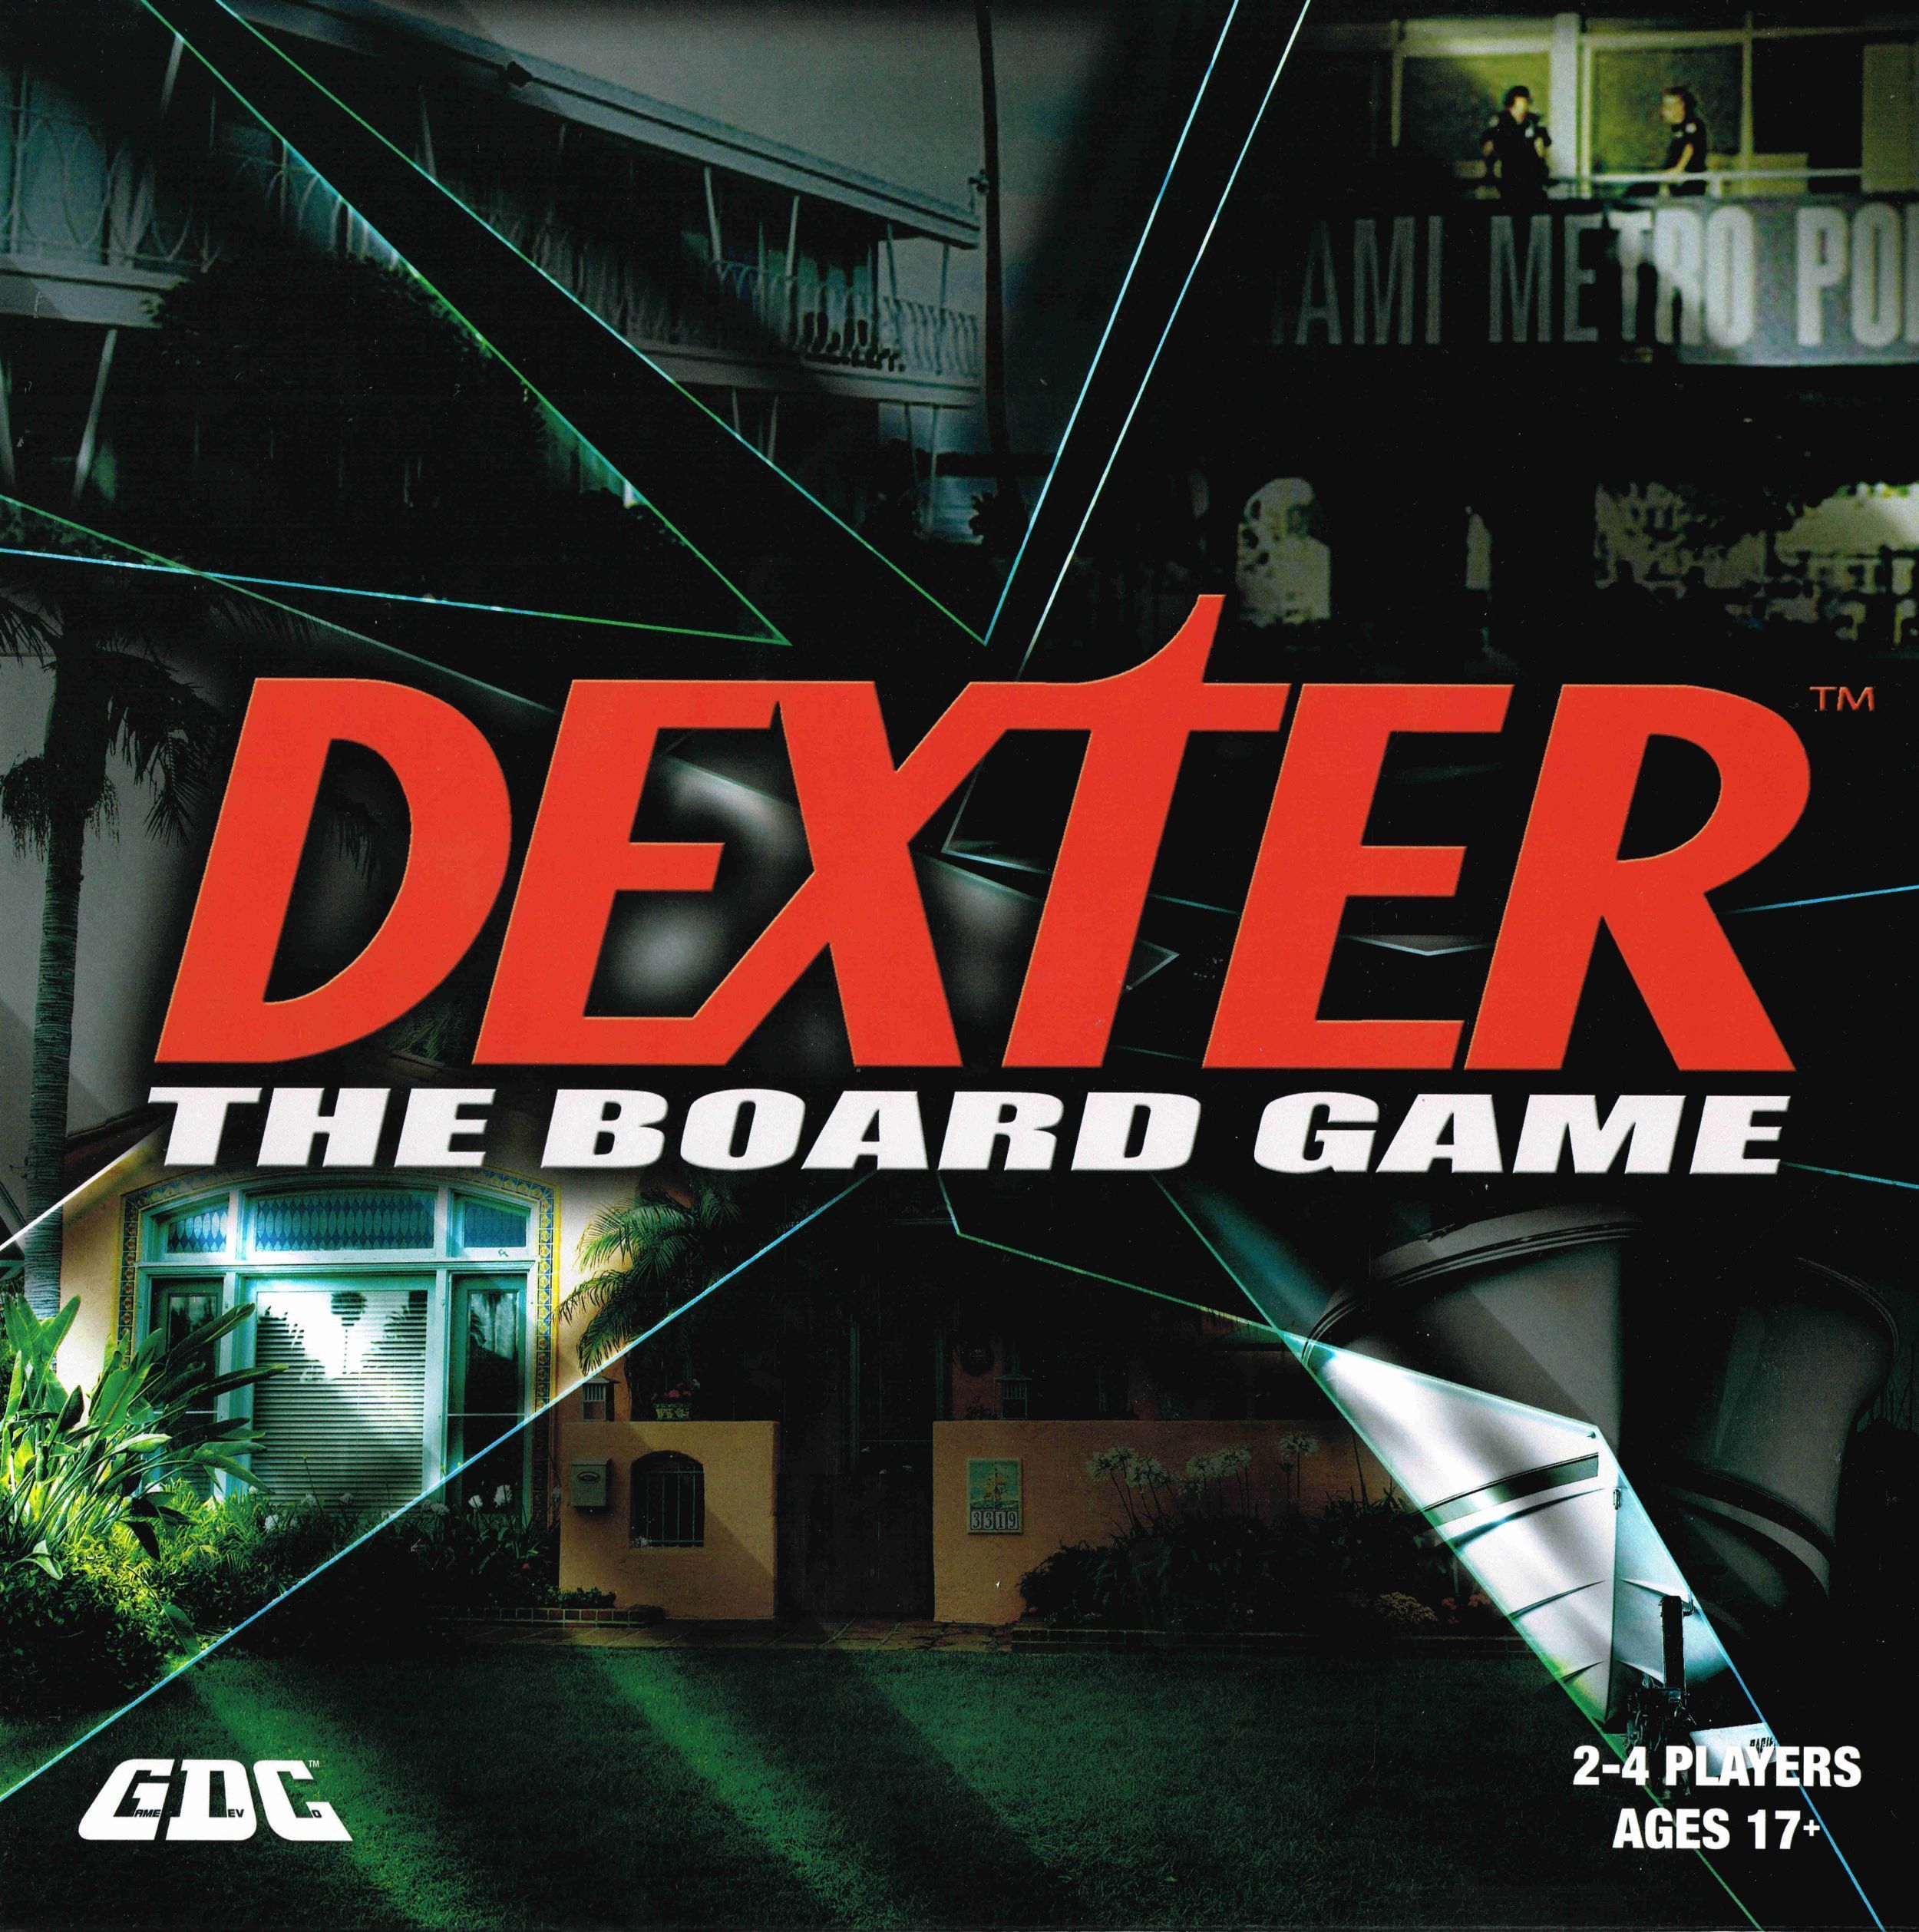 Dexter: The Board Game